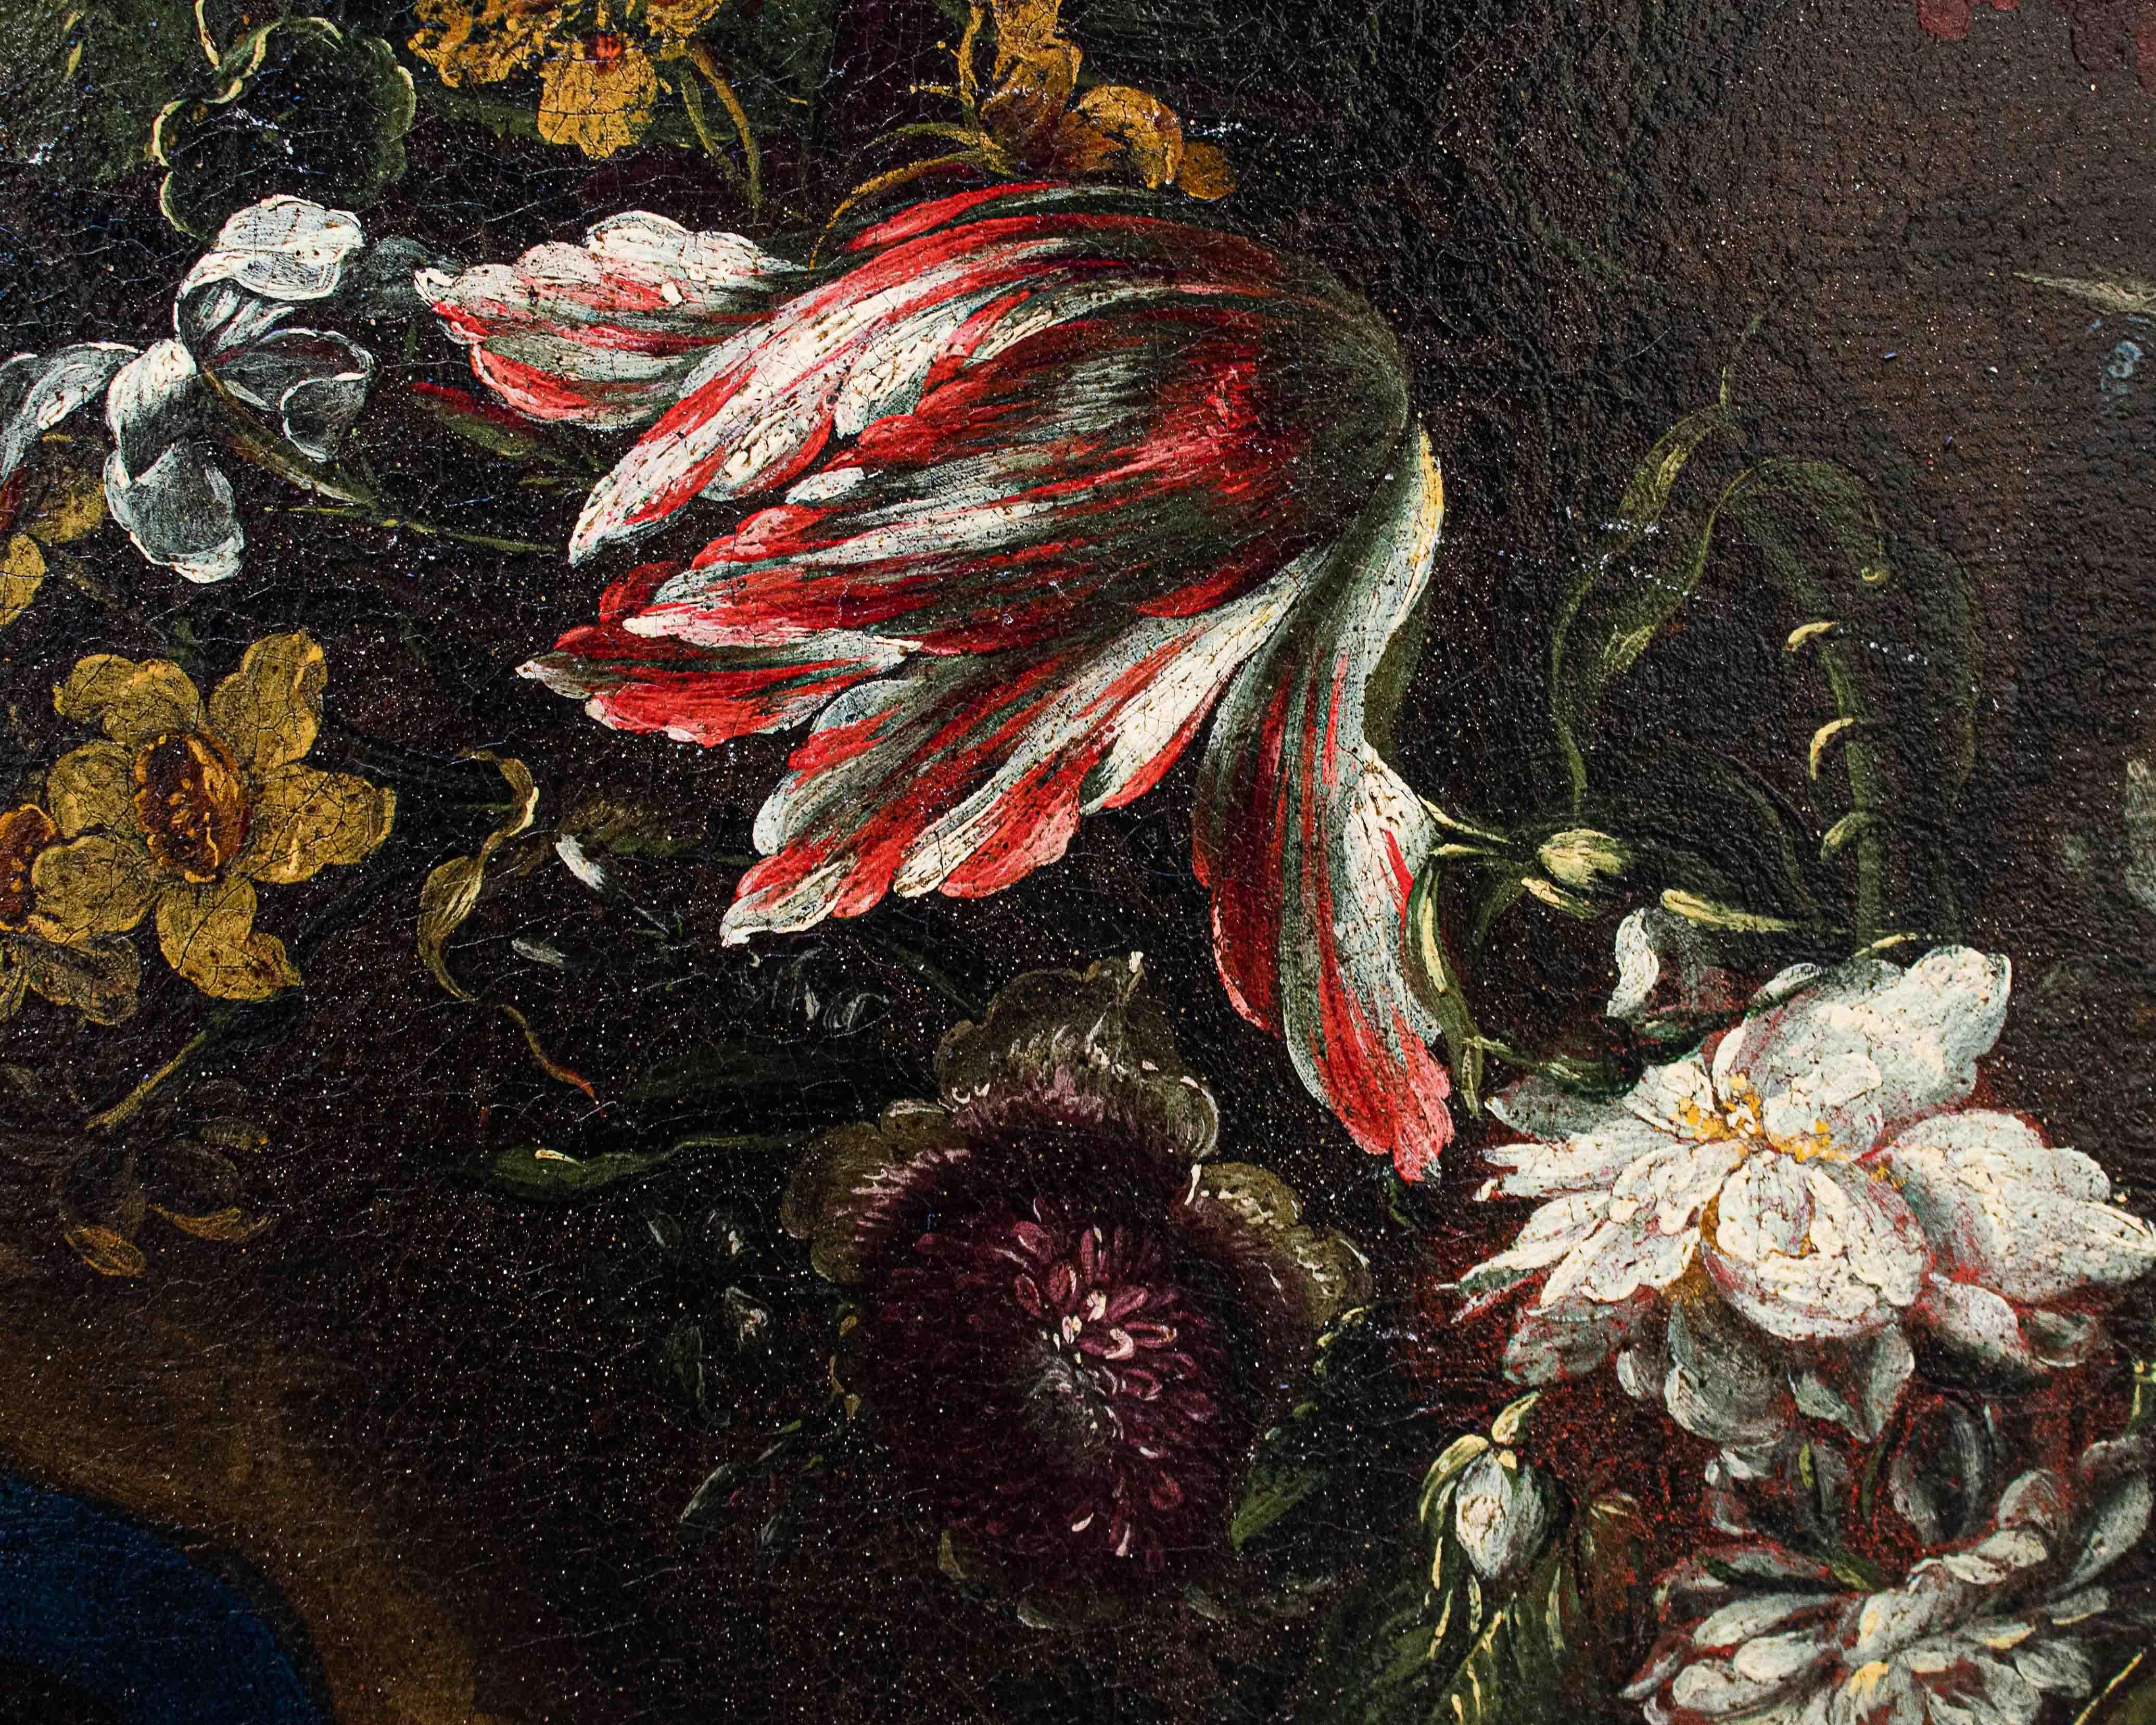 17th-18th Century Virgin with in Garland of Flowers Painting Oil on Canvas 8